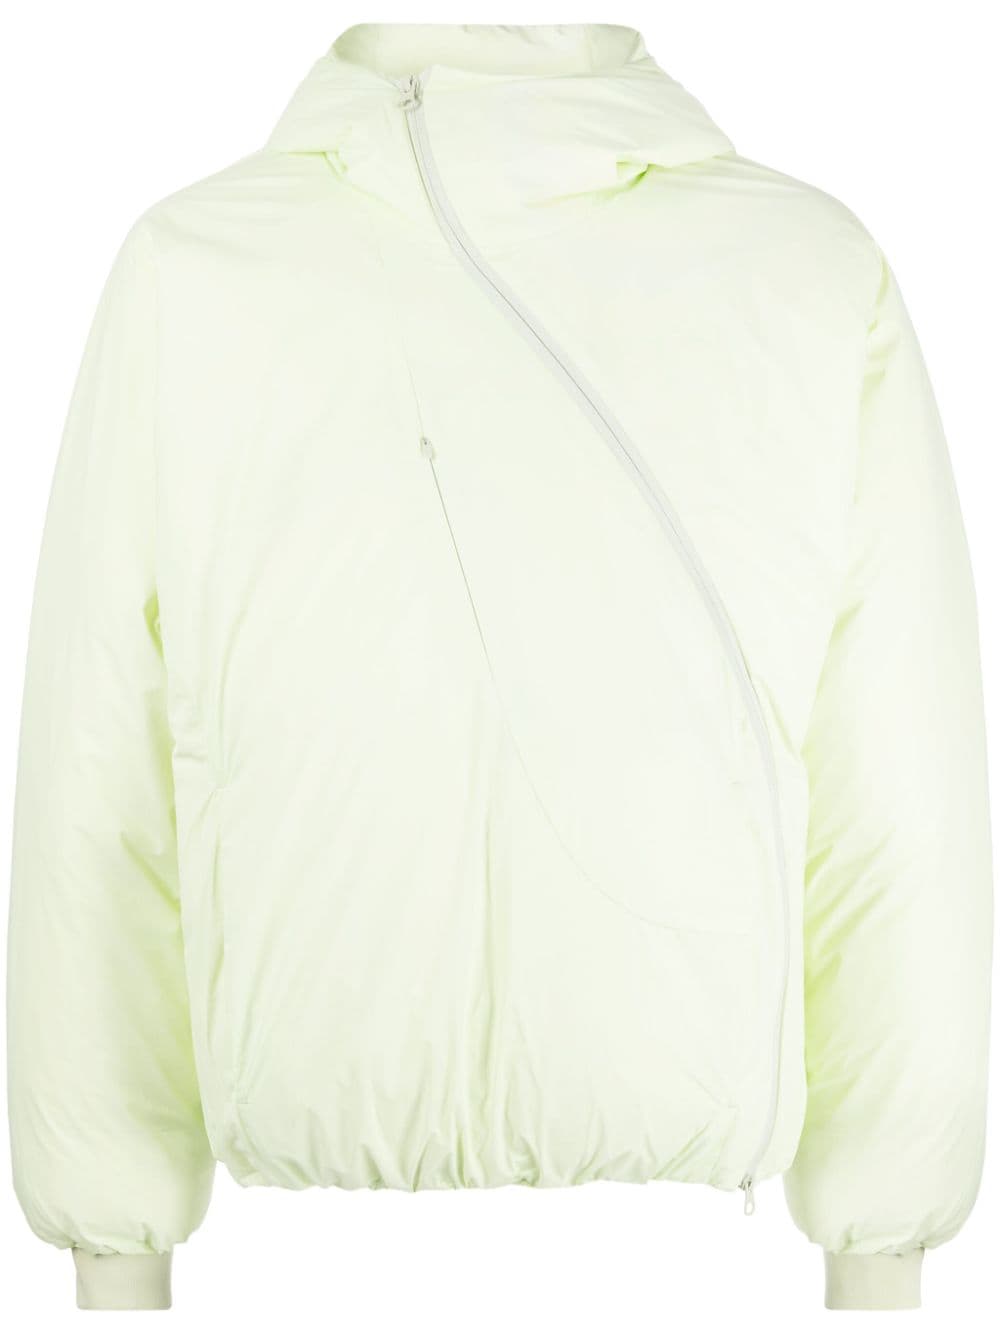 off-centre padded jacket